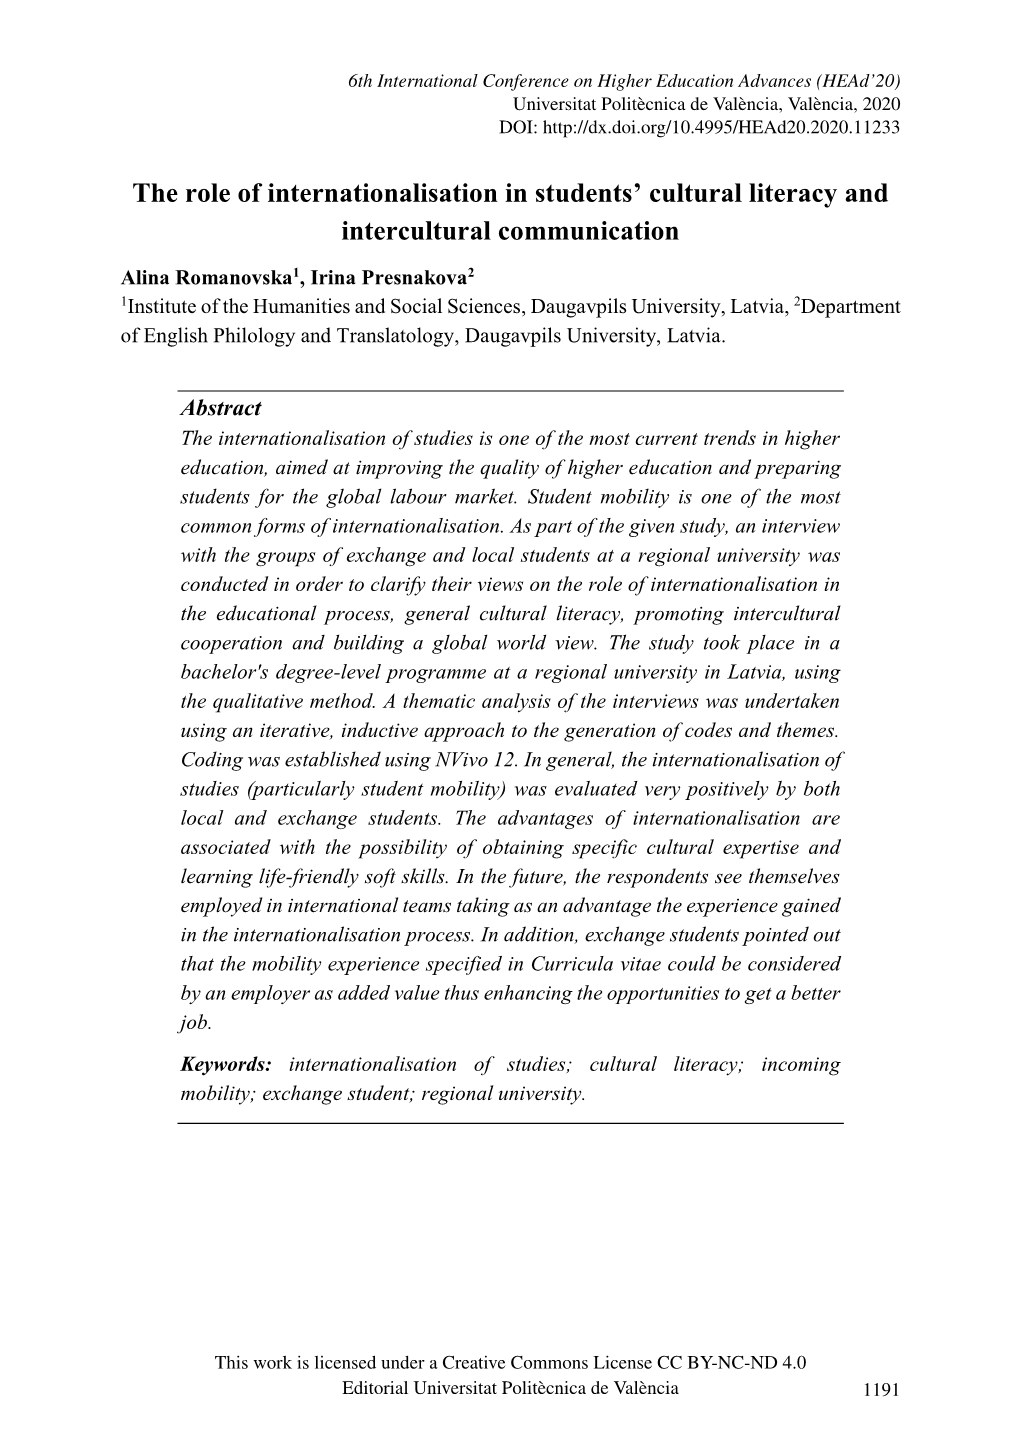 The Role of Internationalisation in Students' Cultural Literacy and Intercultural Communication